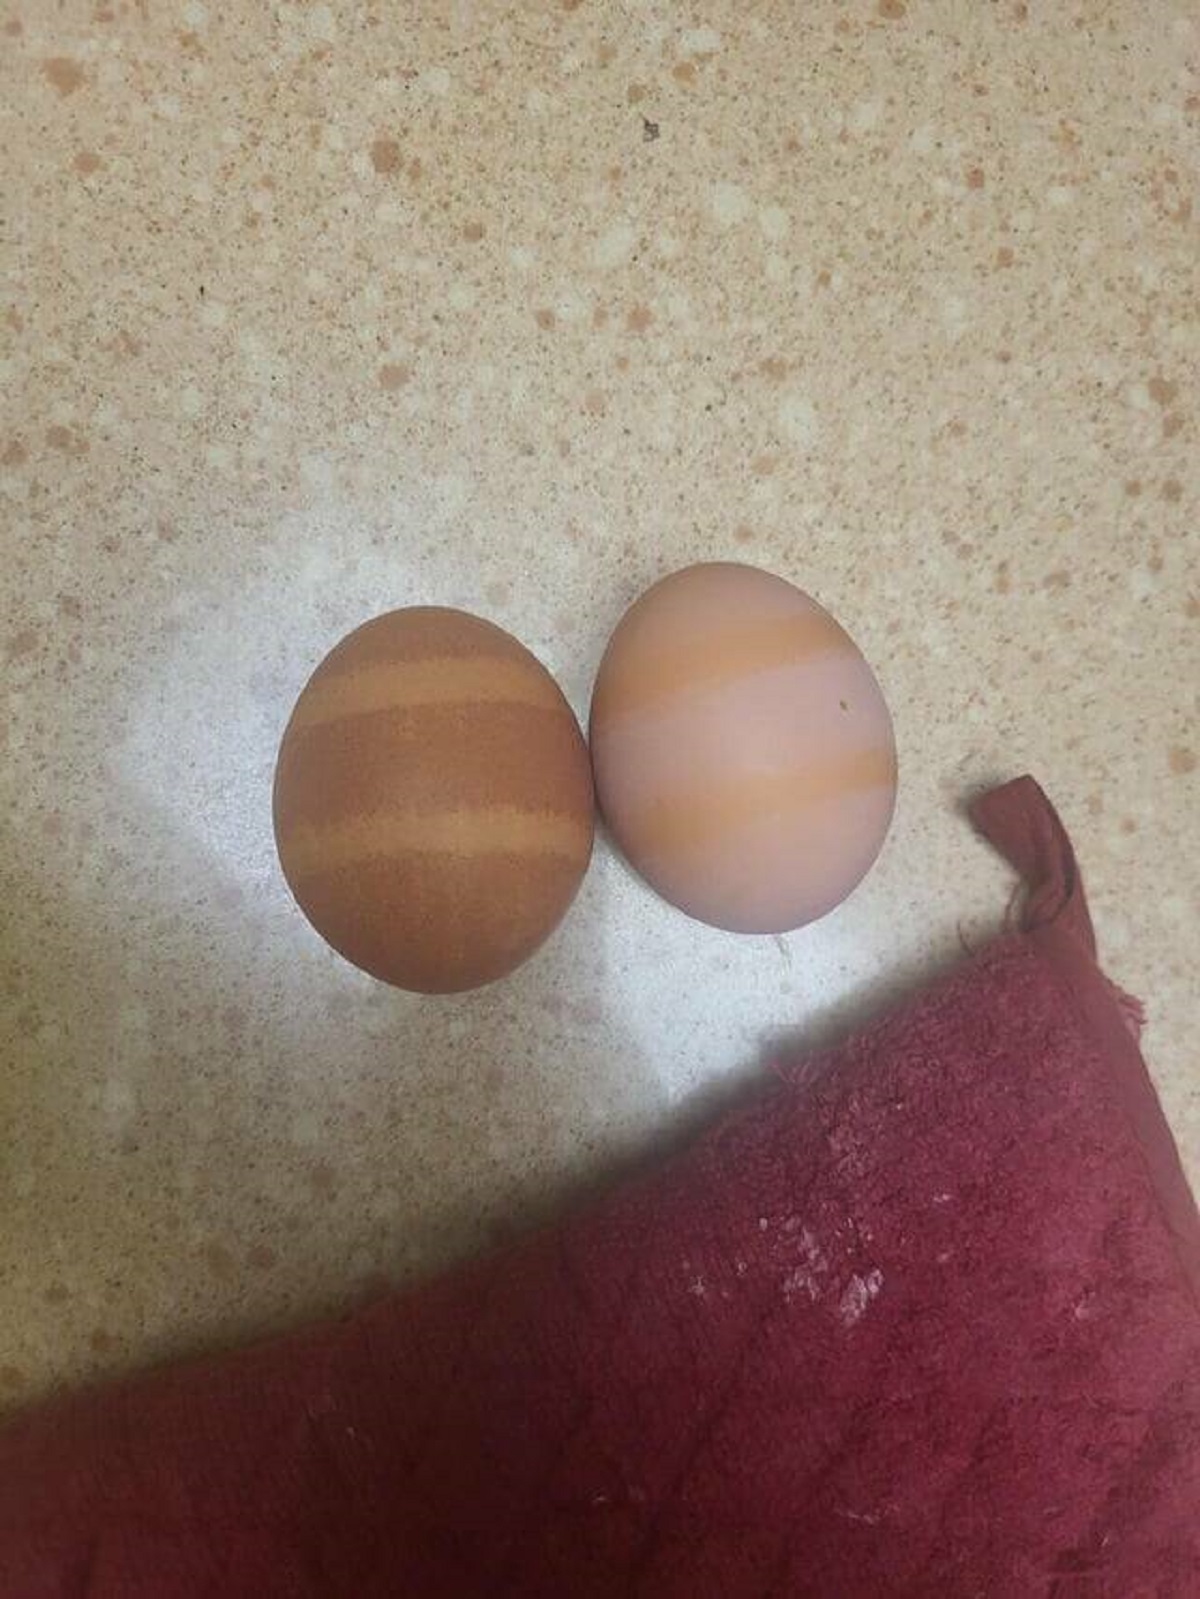 "These striped eggs I took from my free range chickens"